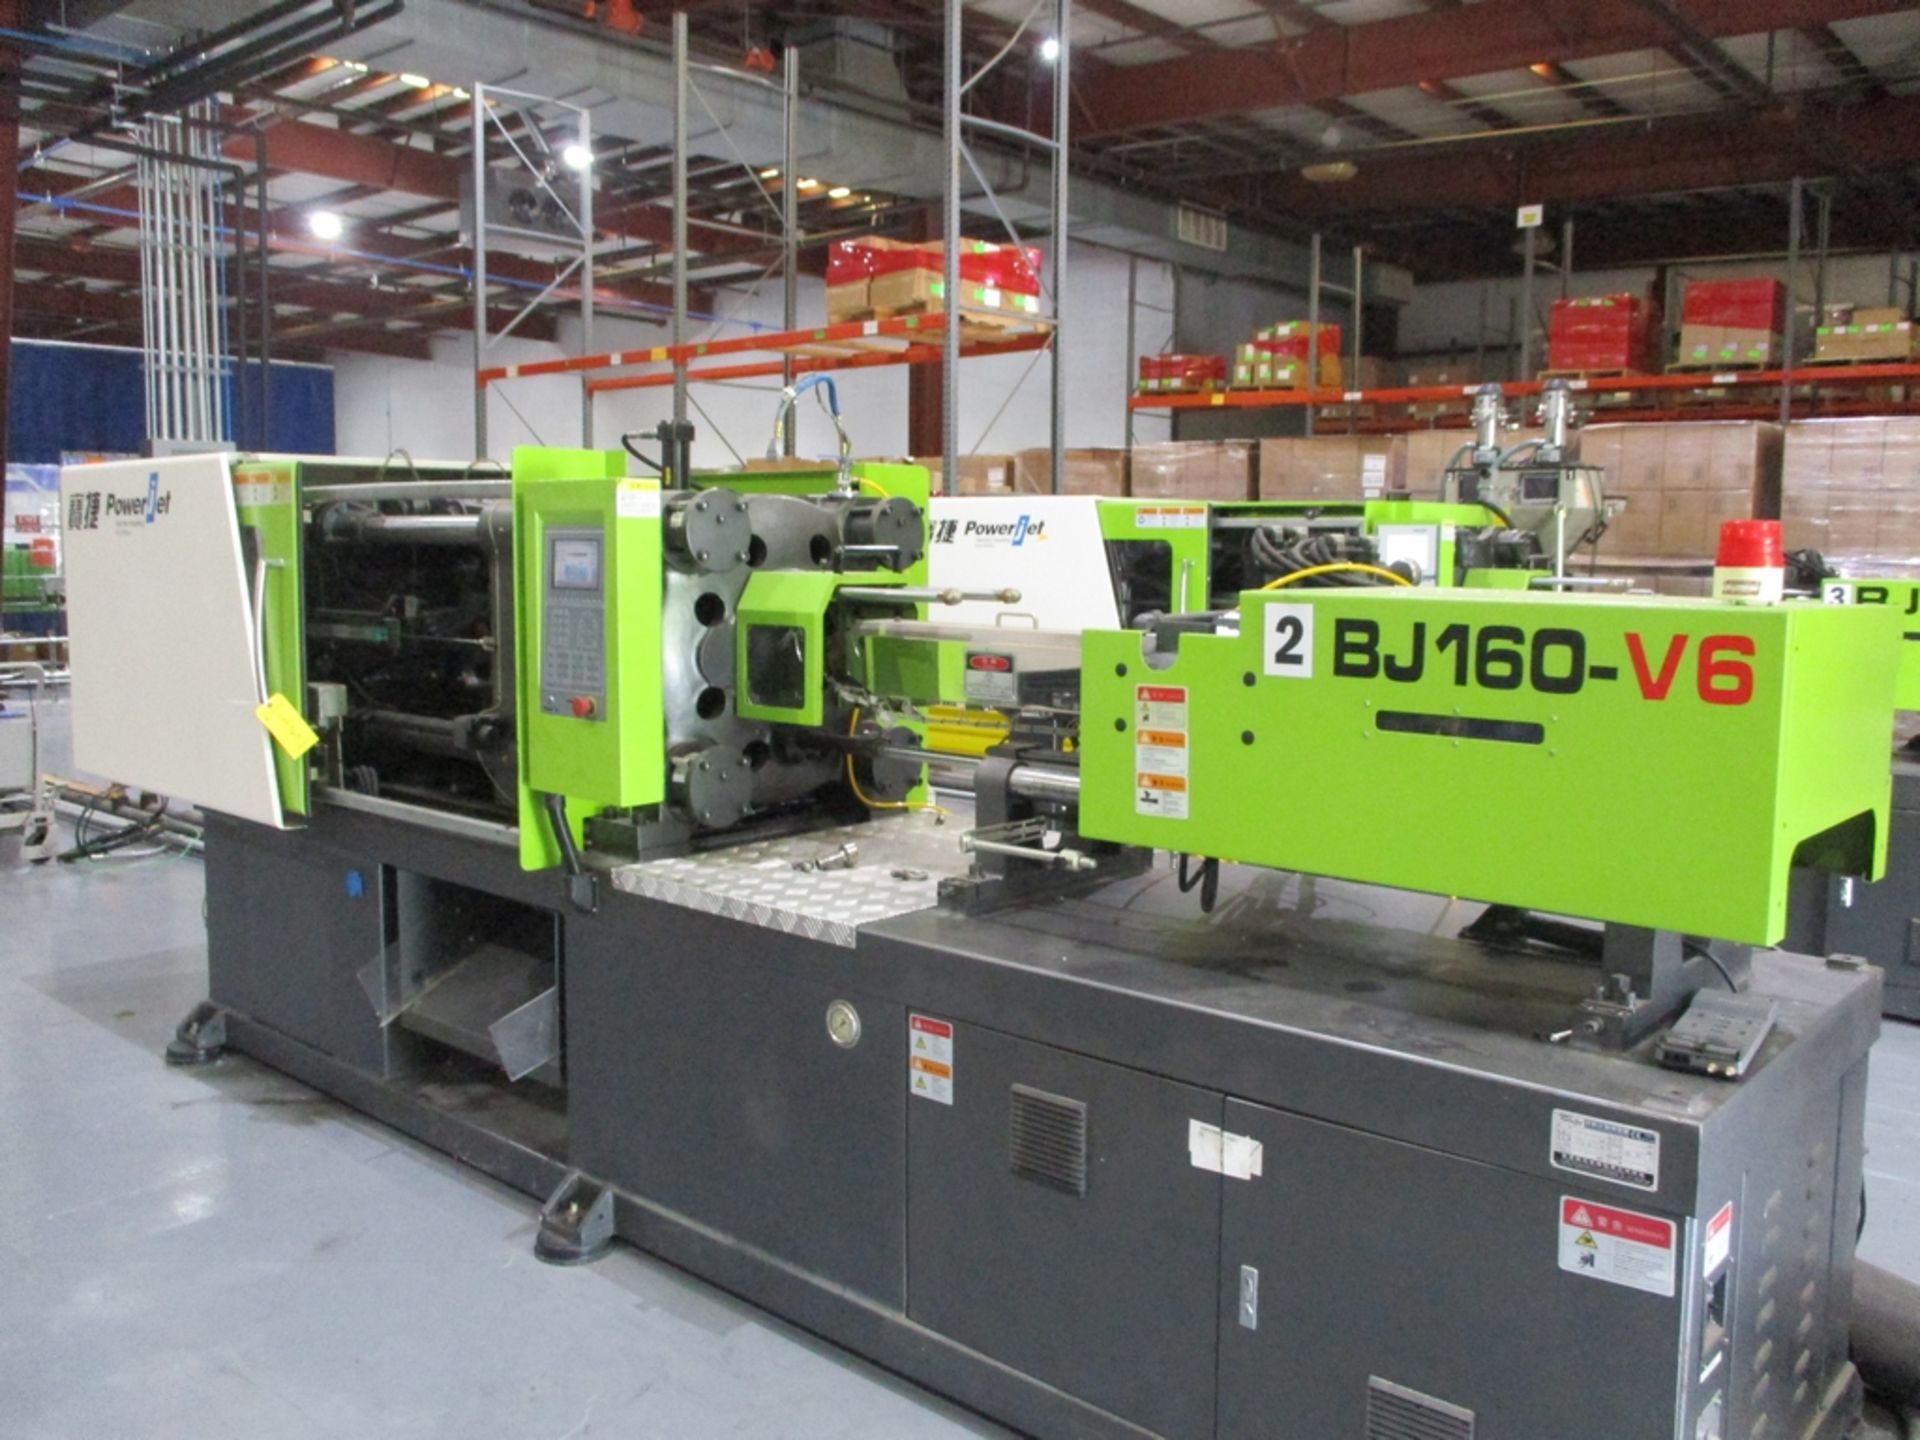 Powerjet BJ160-V6 160-Ton Injection Molding Machine - Variable Pump; Clamping Force: 160 Ton;